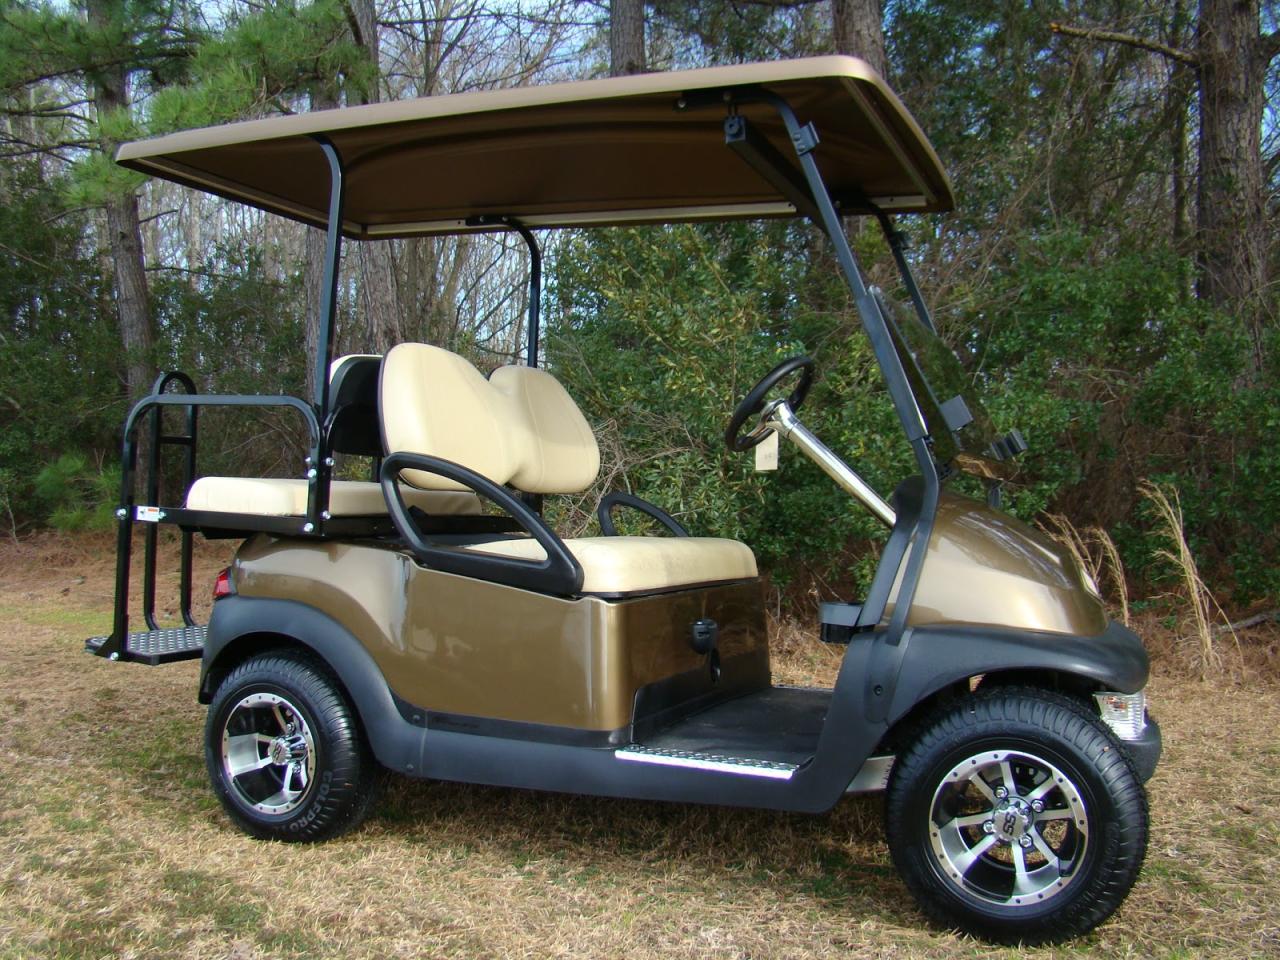 Find Your Dream Ride: Used Golf Carts for Sale by Owner in Union, Illinois